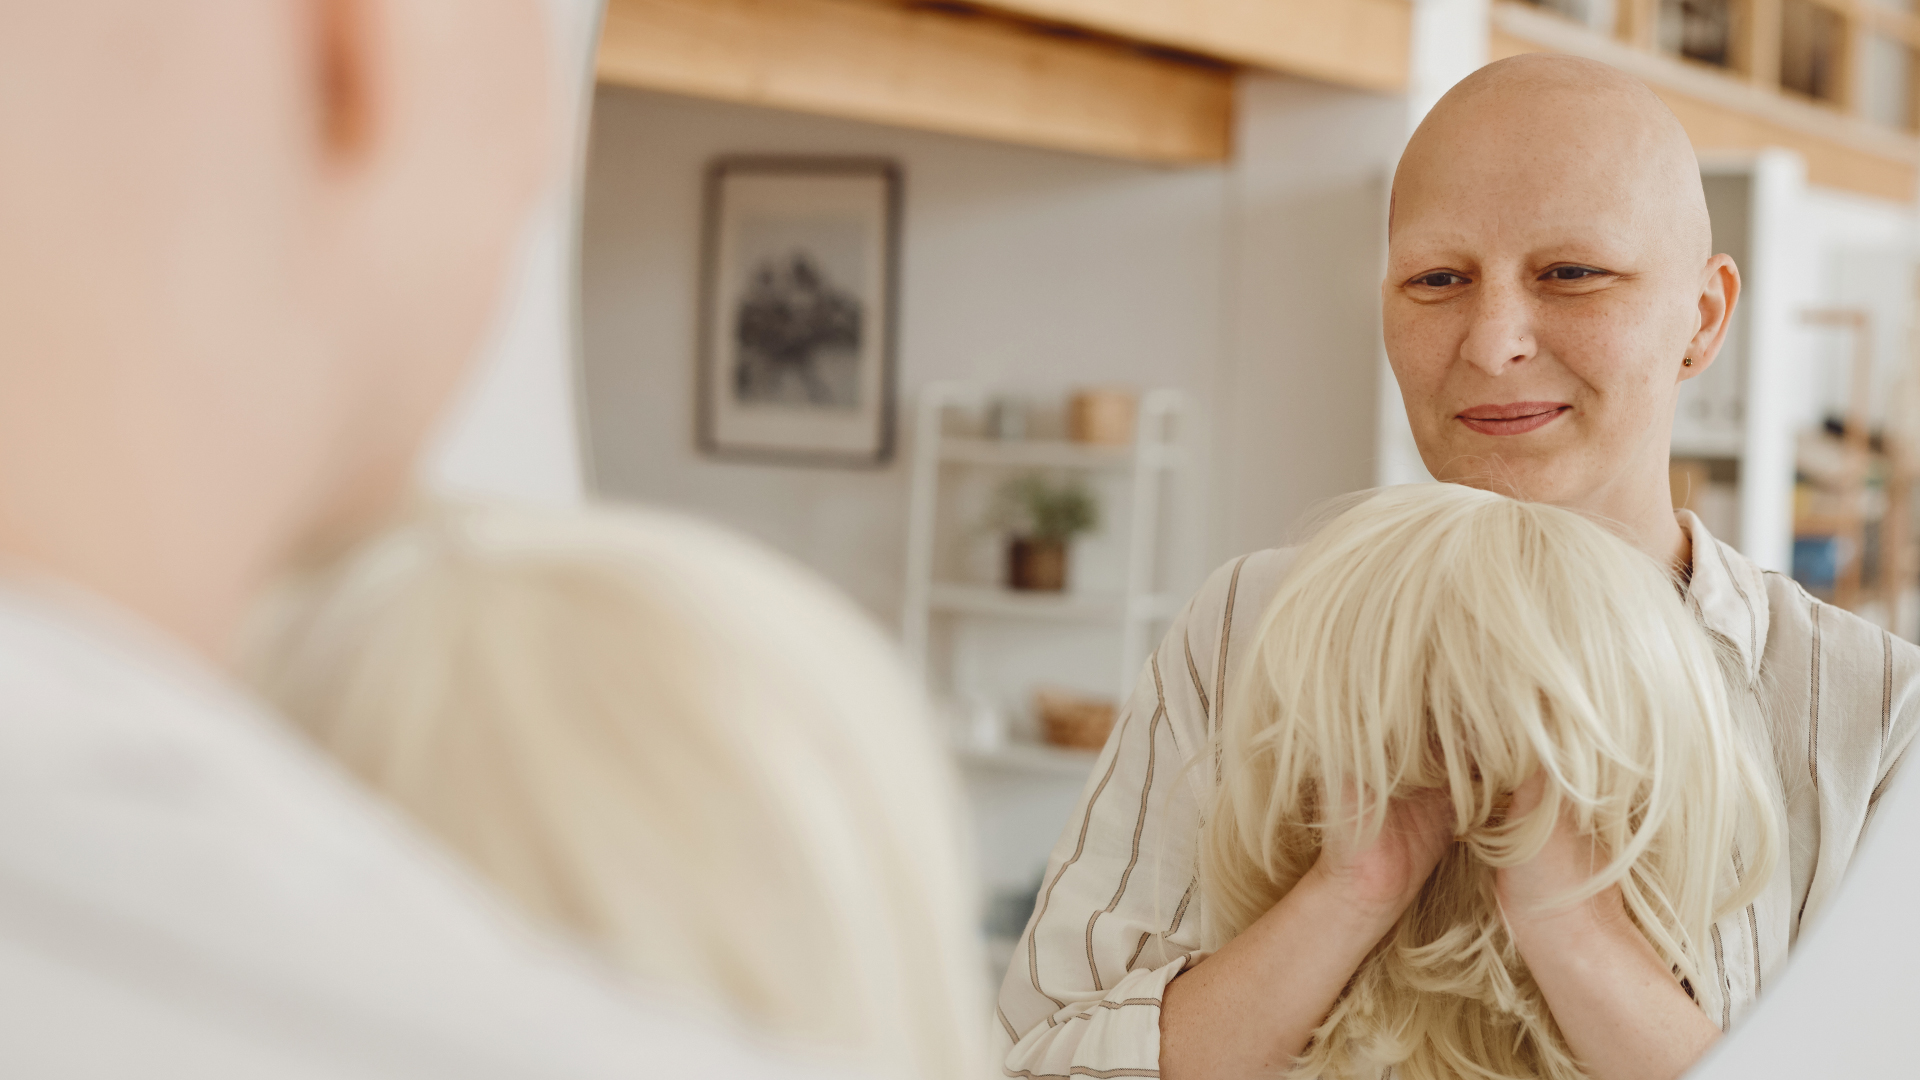 This woman lost her hair because of chemotherapy